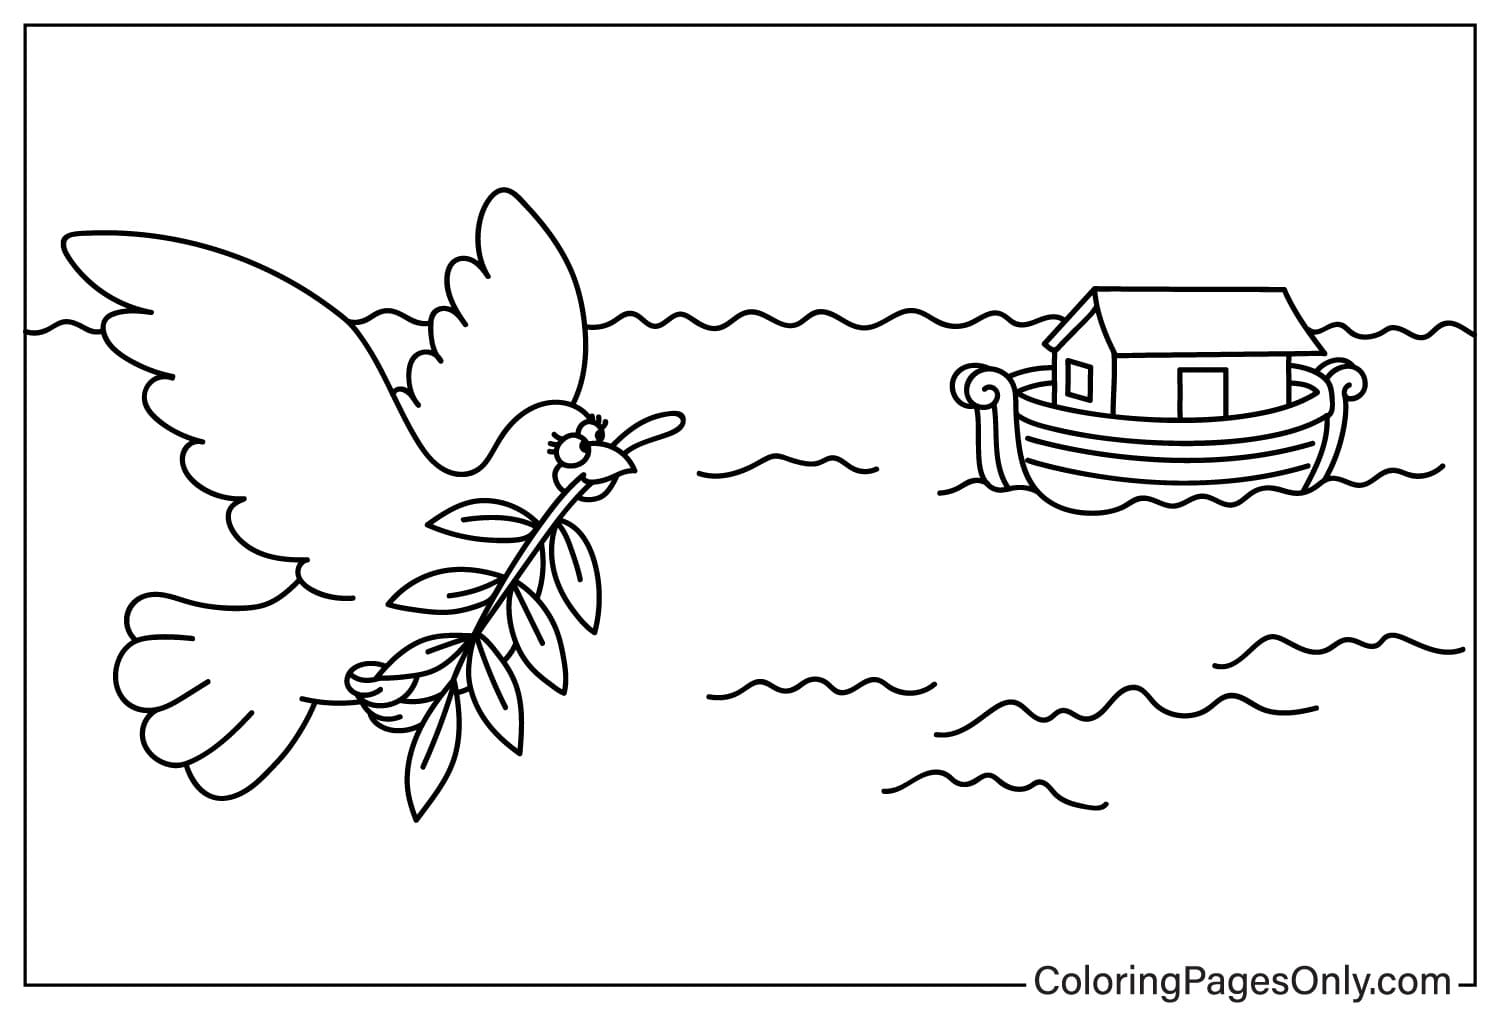 Noah’s Dove Returns with the Olive Leaf Coloring Sheet from Noah’s Ark